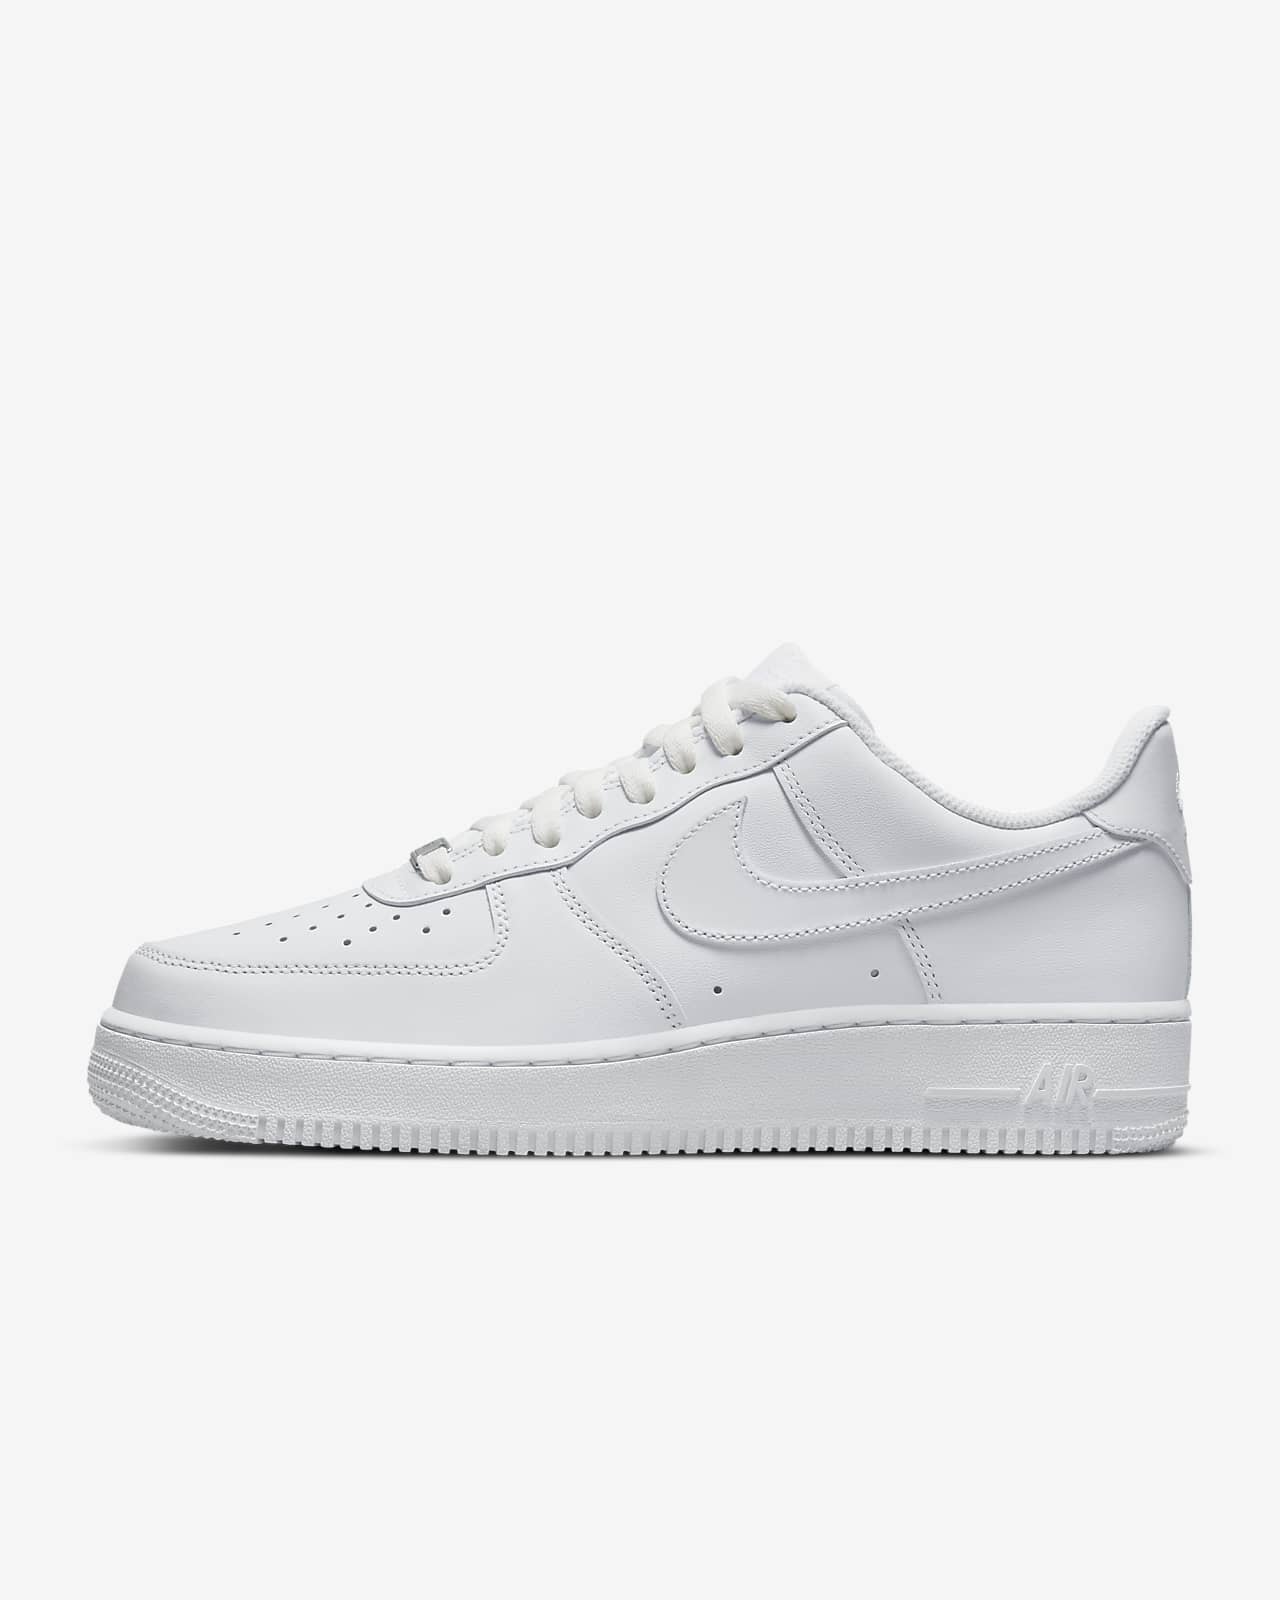 Nike Air Force 1 '07 Men'S Shoes. Nike Vn